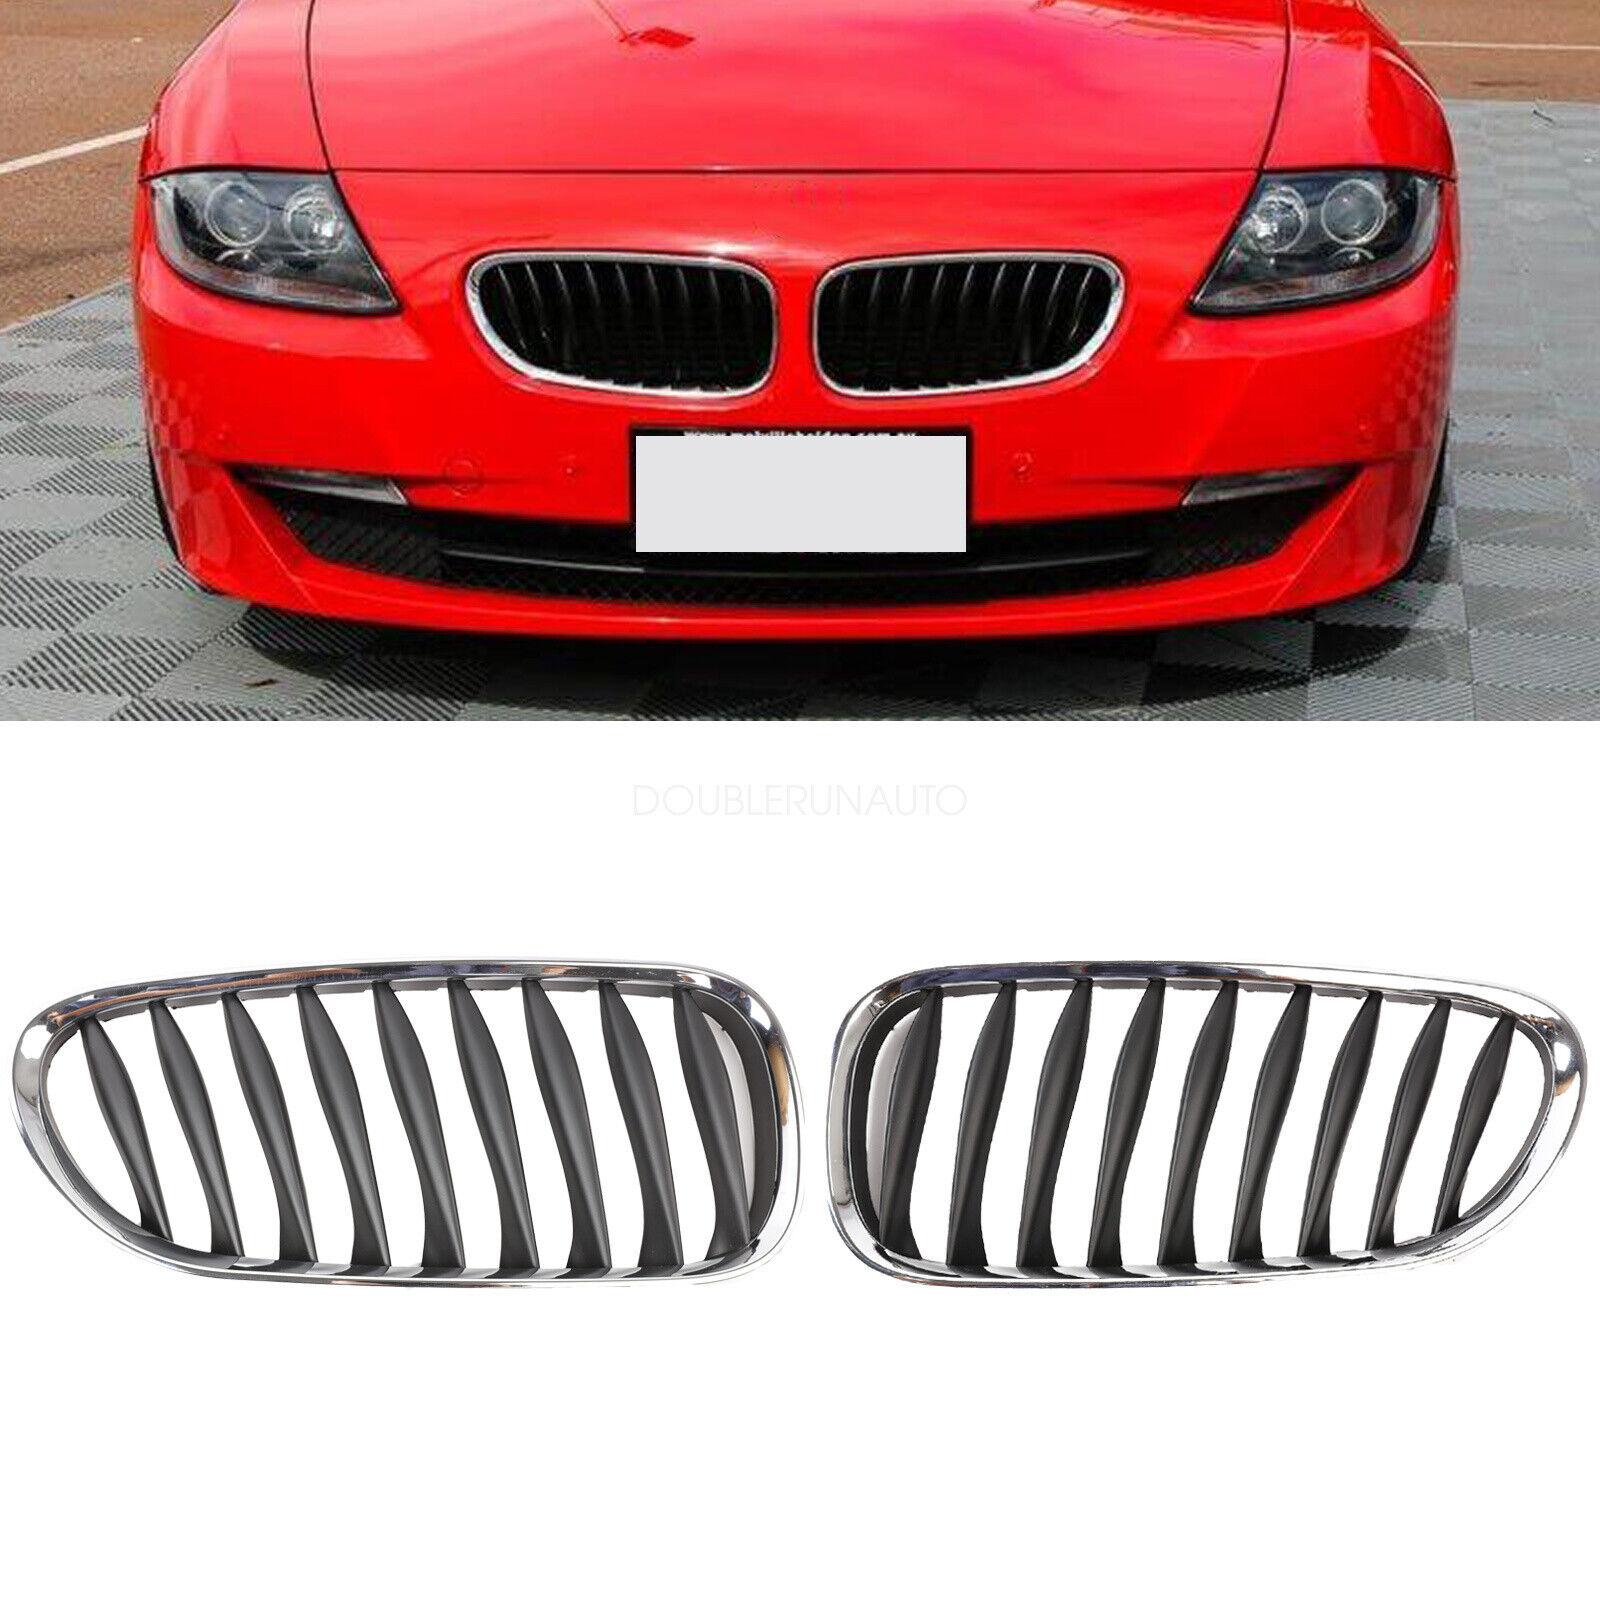 2pcs For BMW Z4 Coupe E85 2003-2009 Convertible Front Kidney Grille Grill Chrome